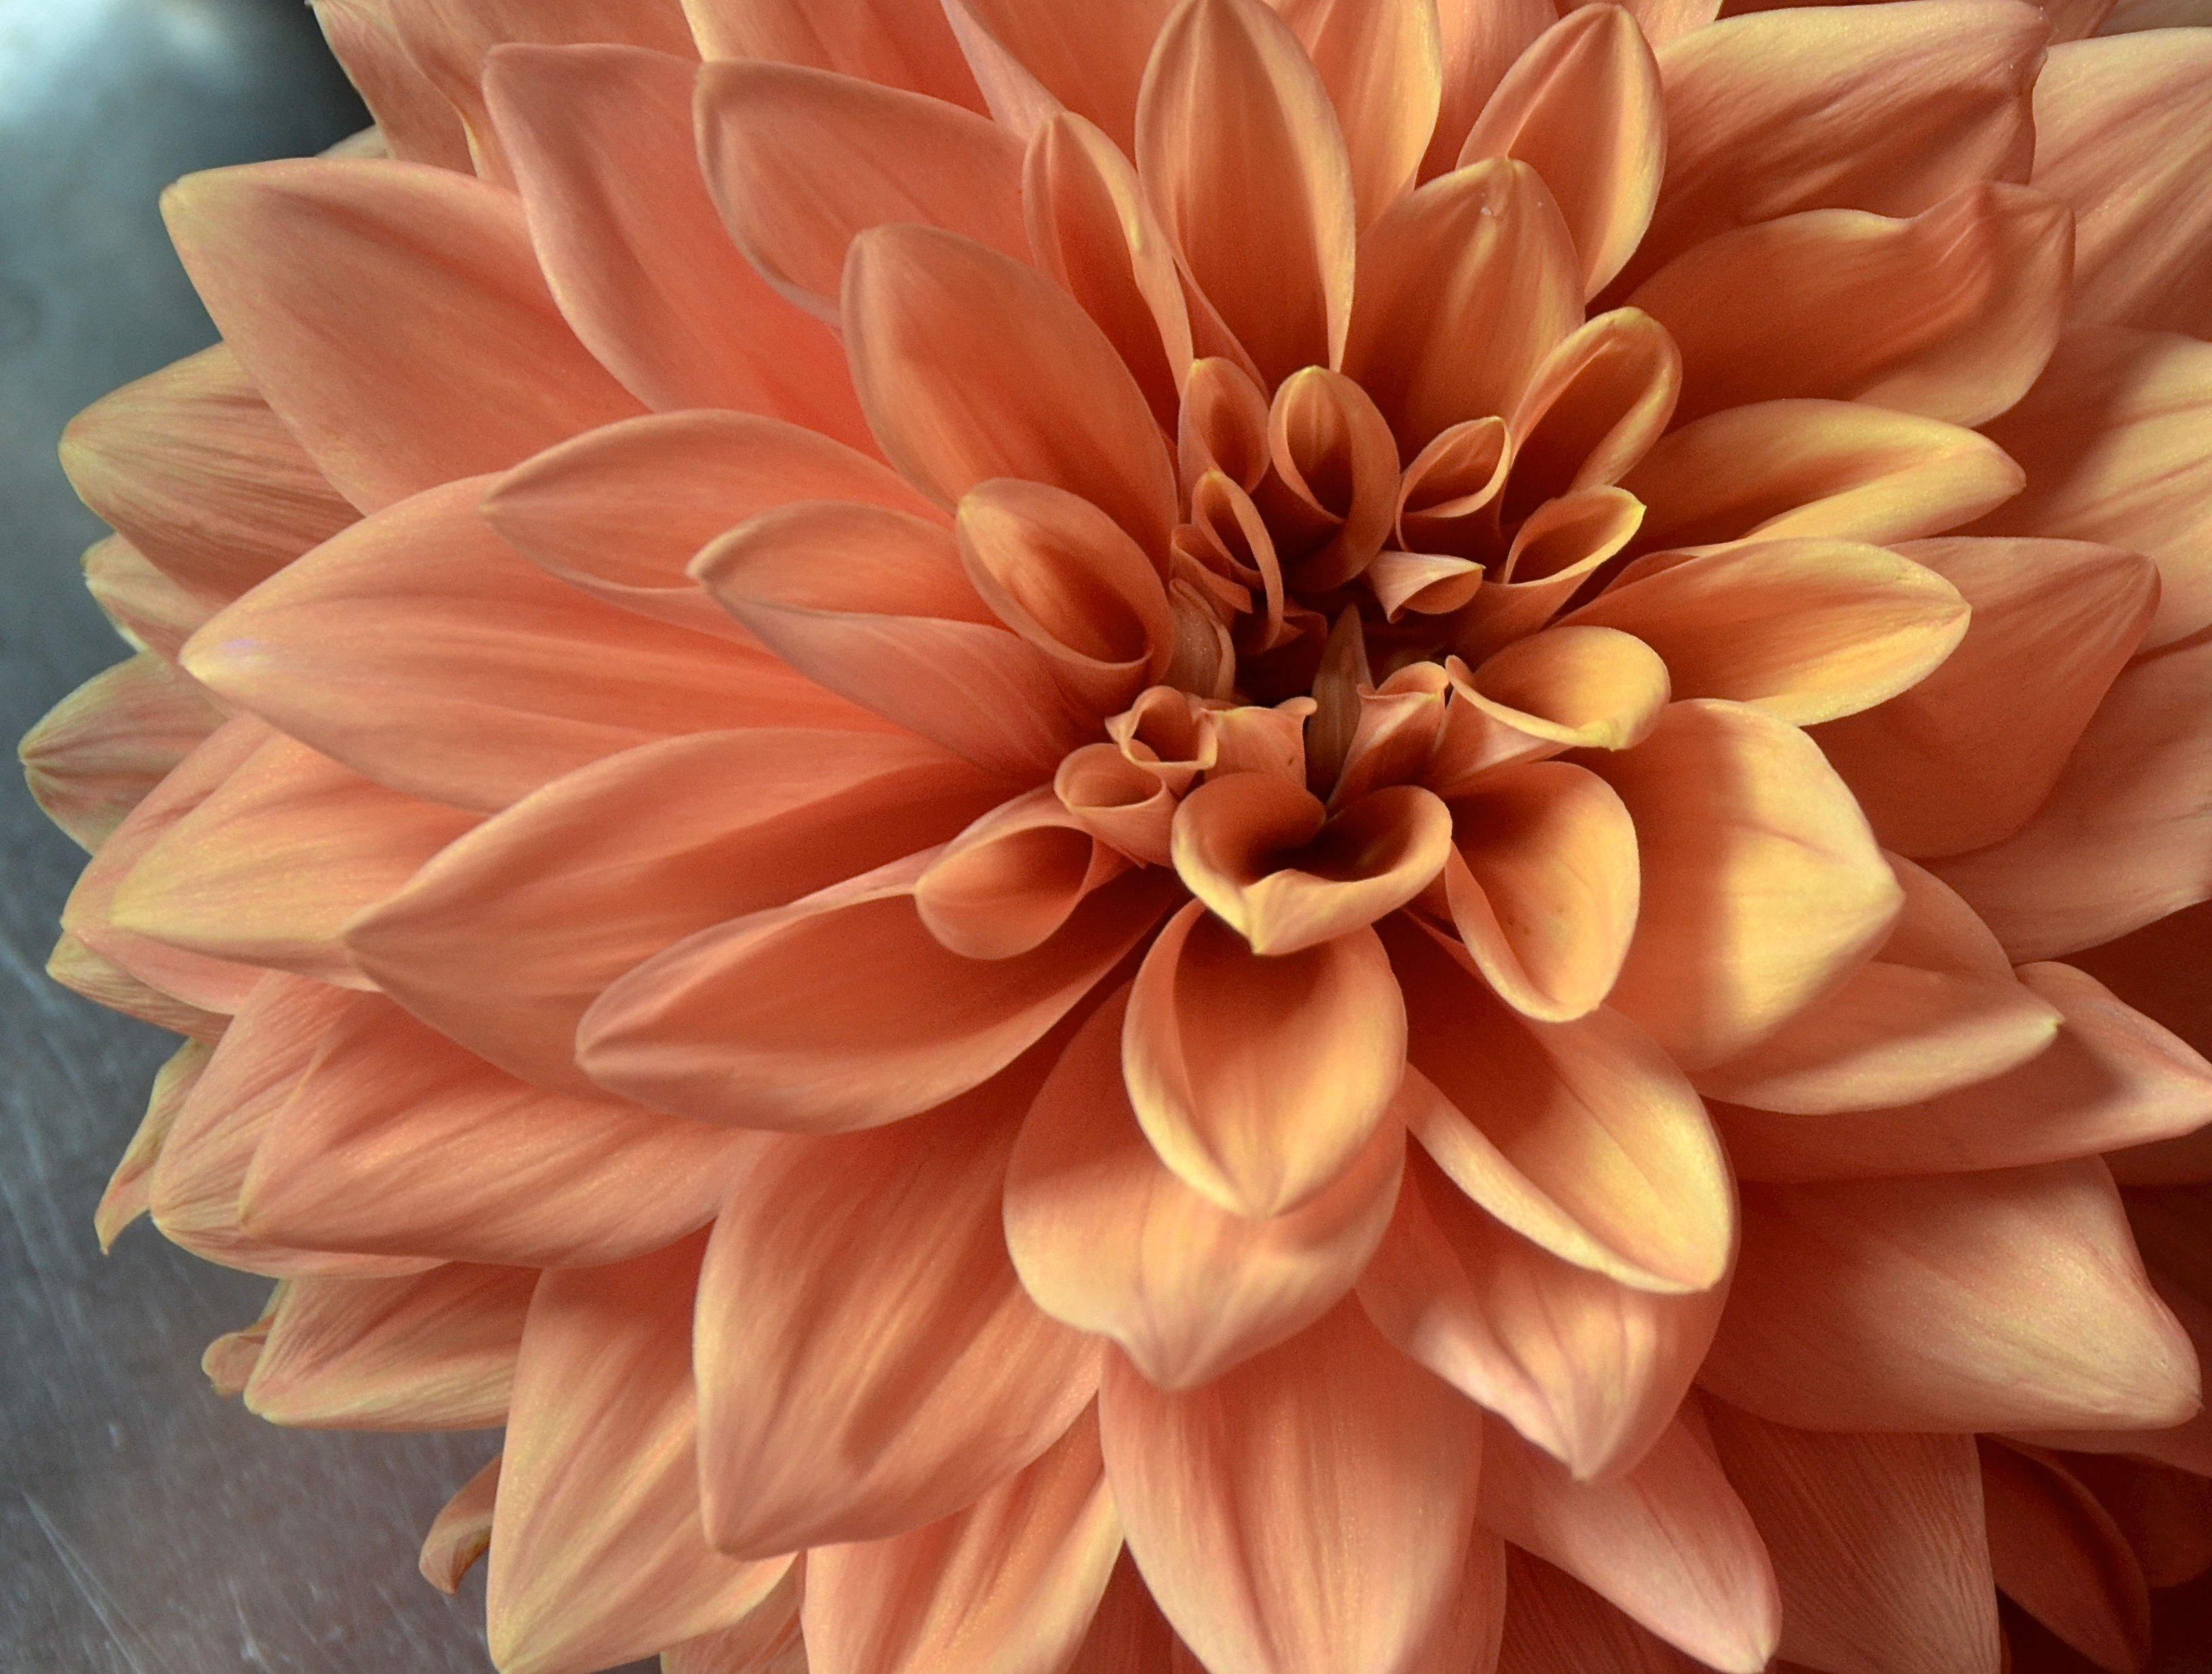 Heart of Milwaukee Dahlia. All dahlias seem to change color as they age and are bleached by the sun. Colors also appear different at different times of the day.